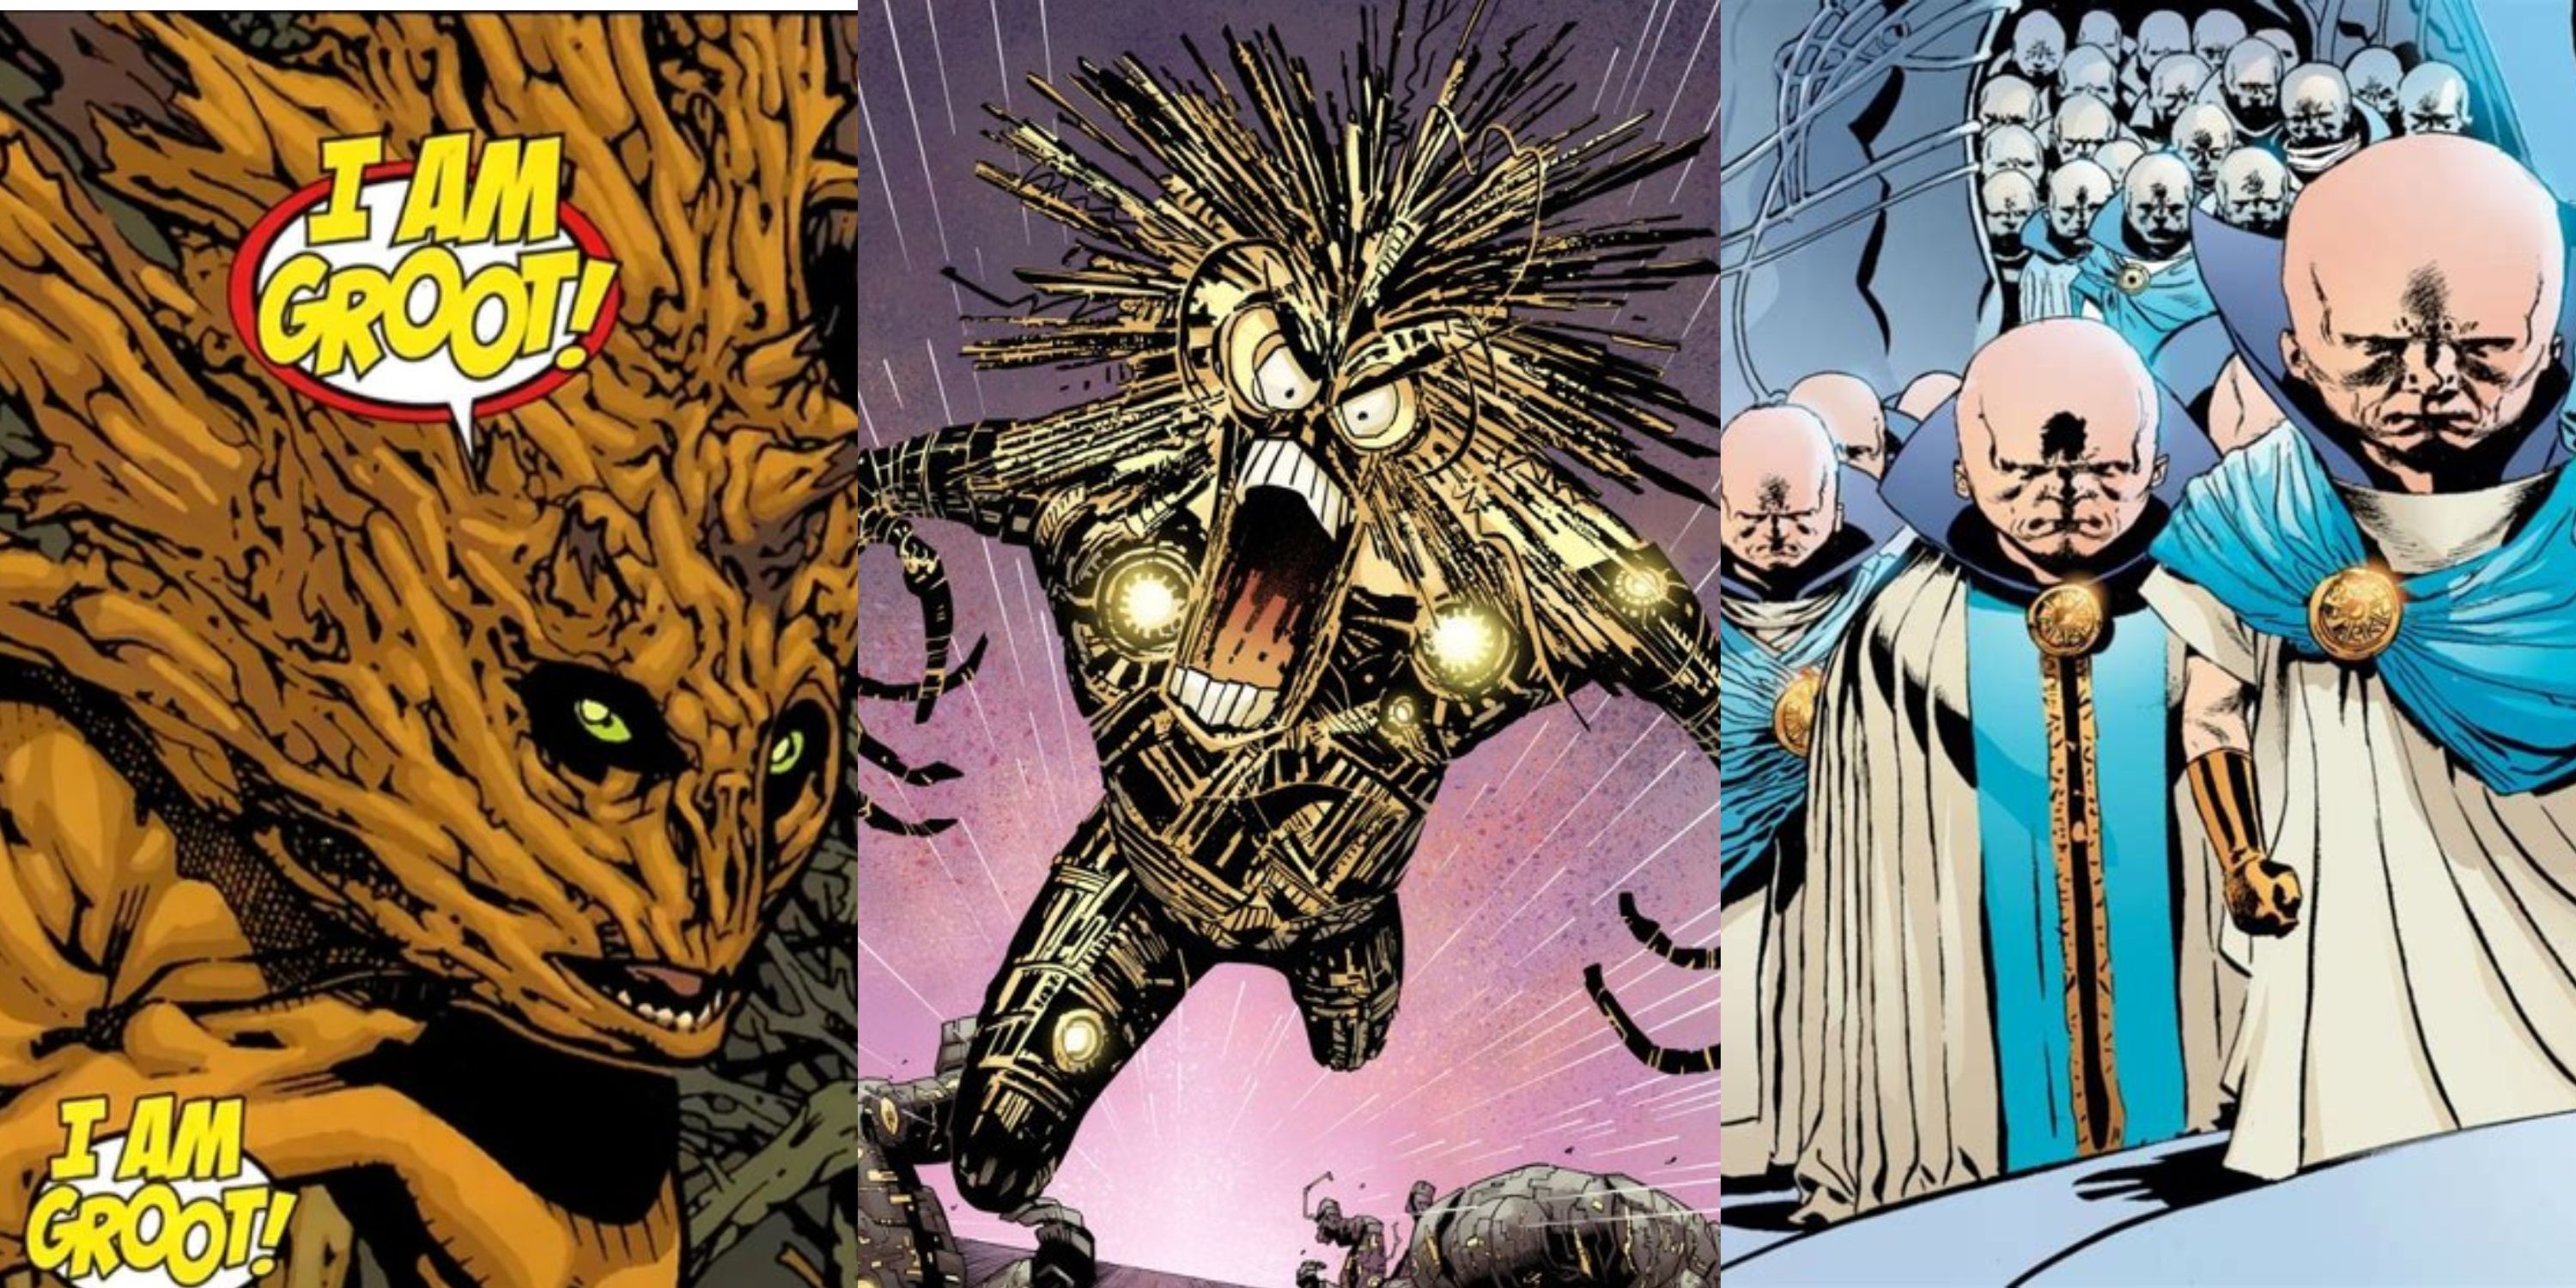 Split image of Flora colossus of Groot, Warlock attacks, and Watchers in Marvel Comics